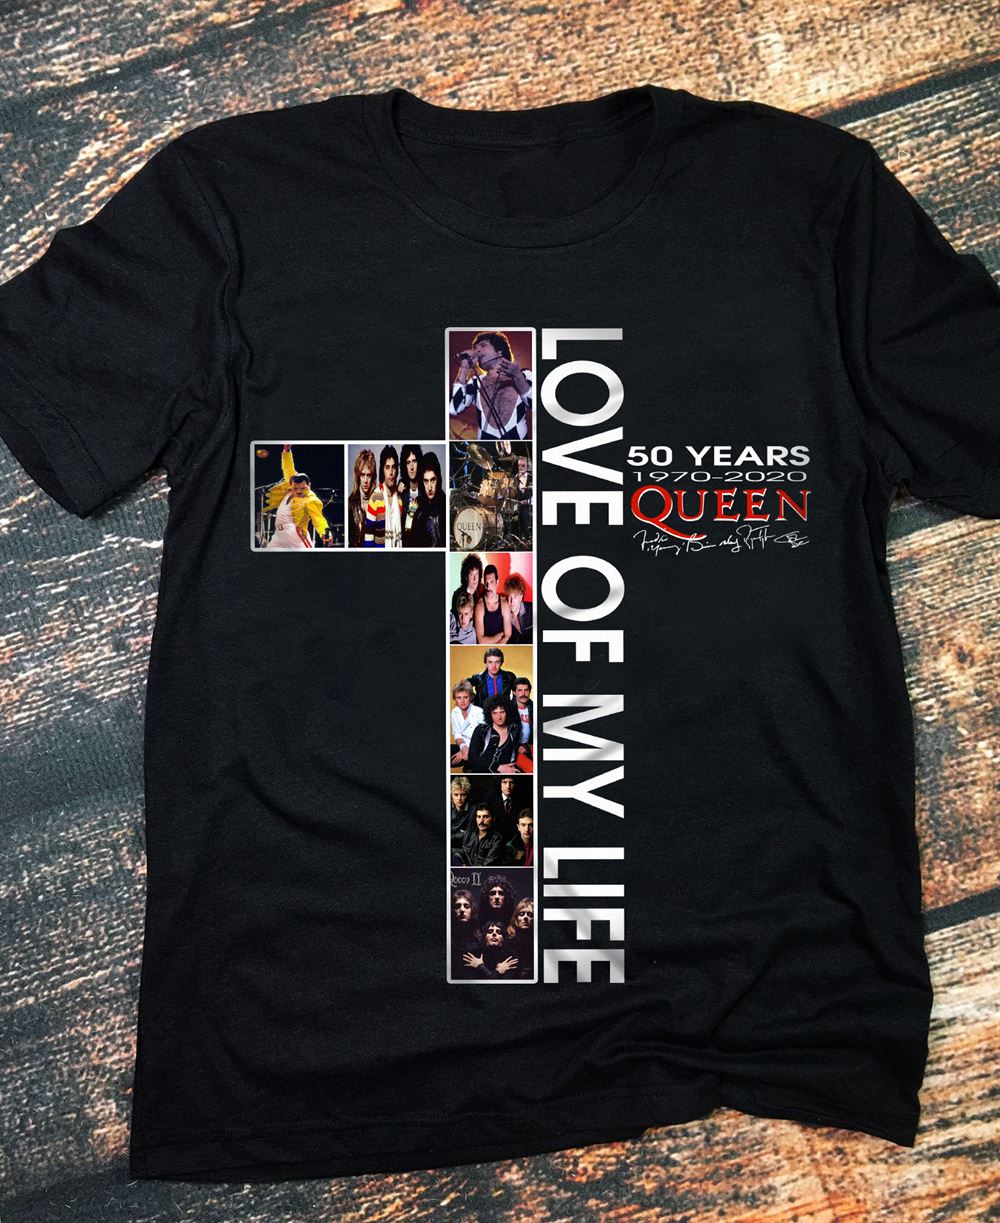 50th Years Of Queen Love Of My Life 1970-2020 T-shirt Hoodie Tank Top Size Up To 5xl